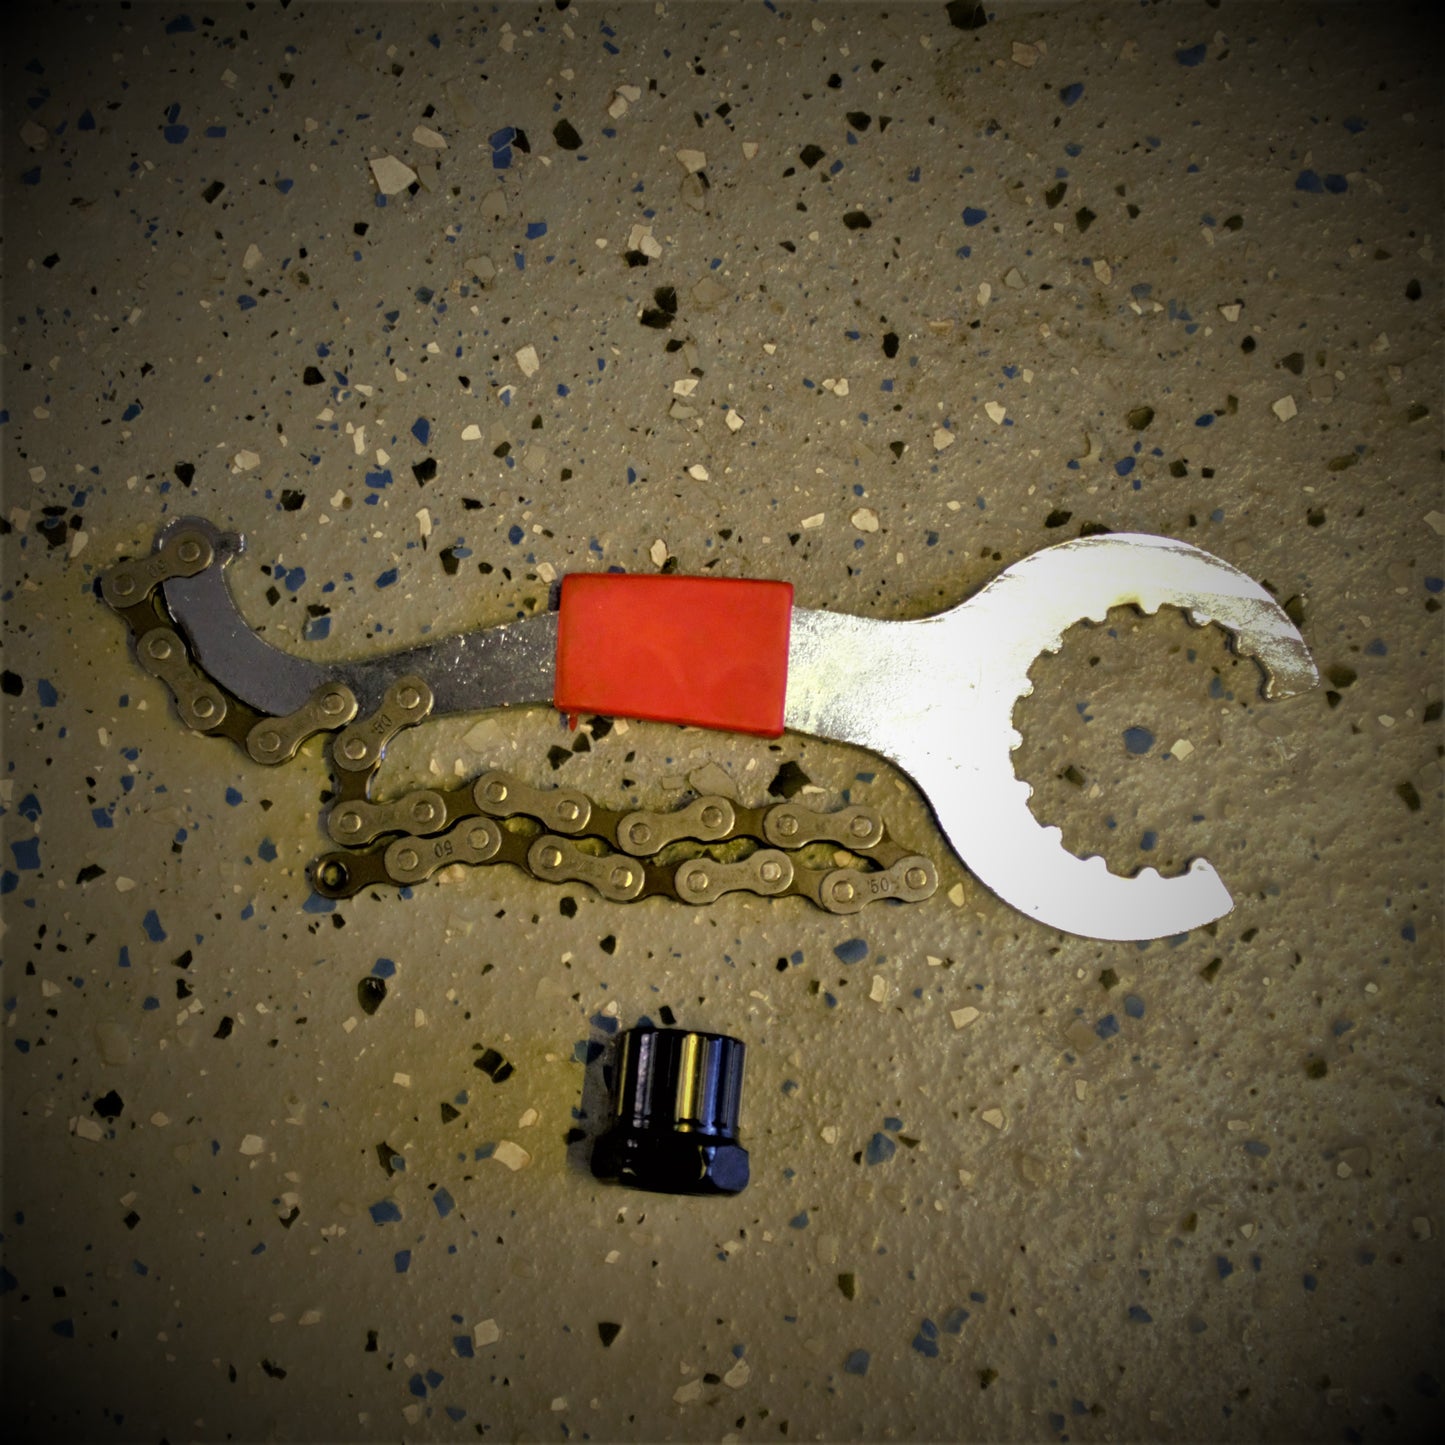 Cassette Removal Tool